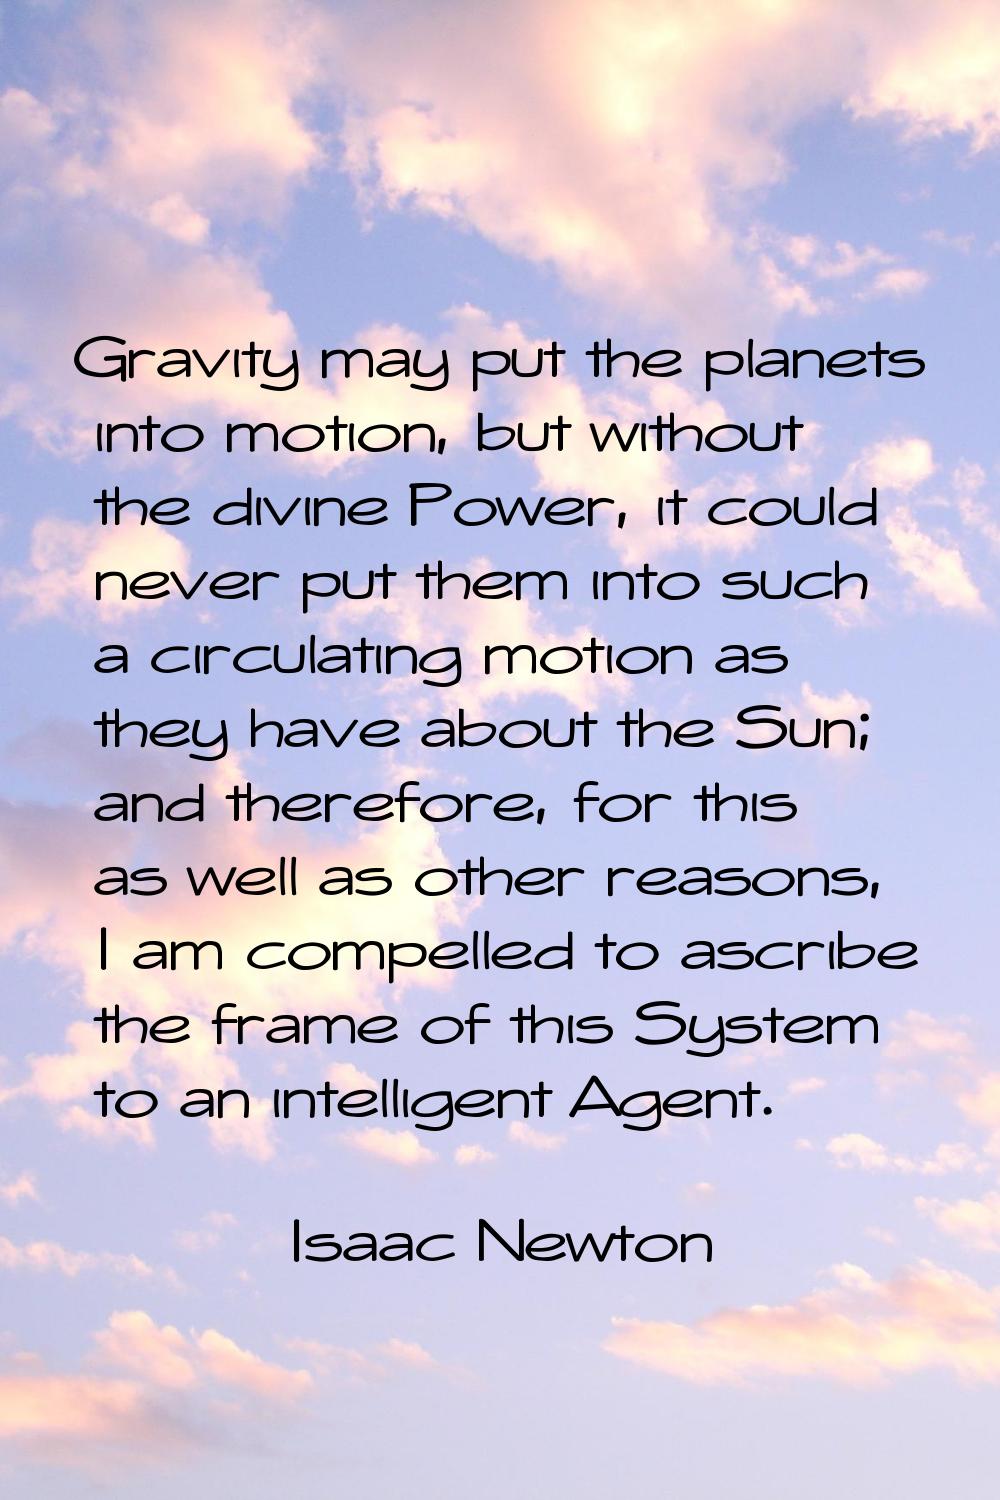 Gravity may put the planets into motion, but without the divine Power, it could never put them into